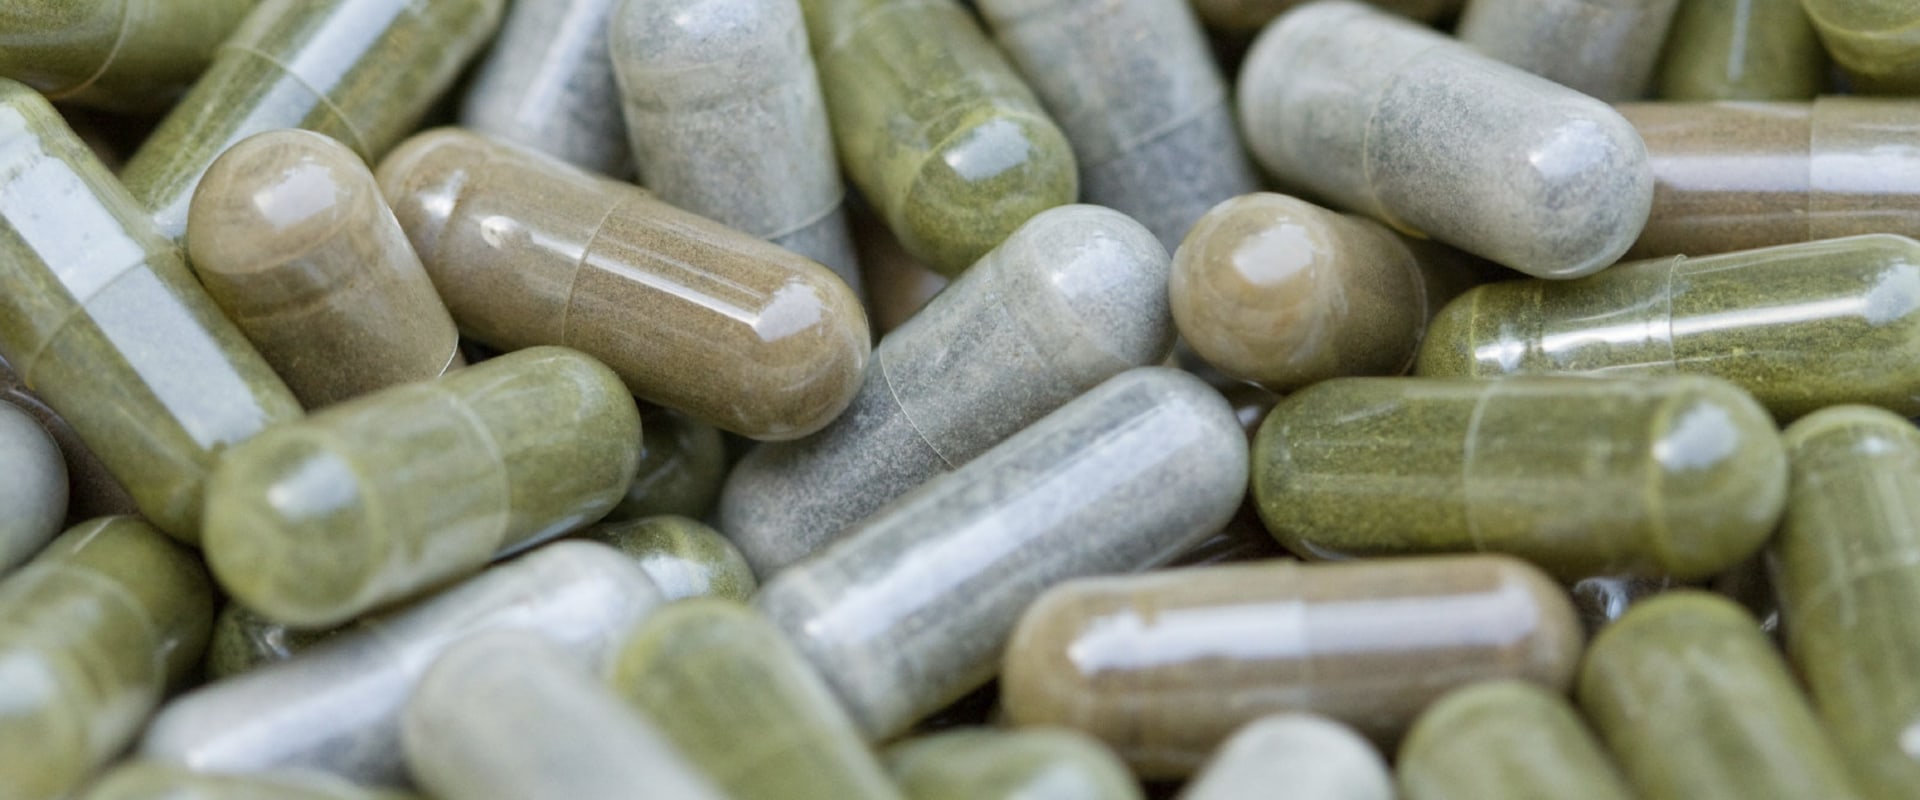 Are Dietary Supplements Safe to Take Every Day? - An Expert's Perspective